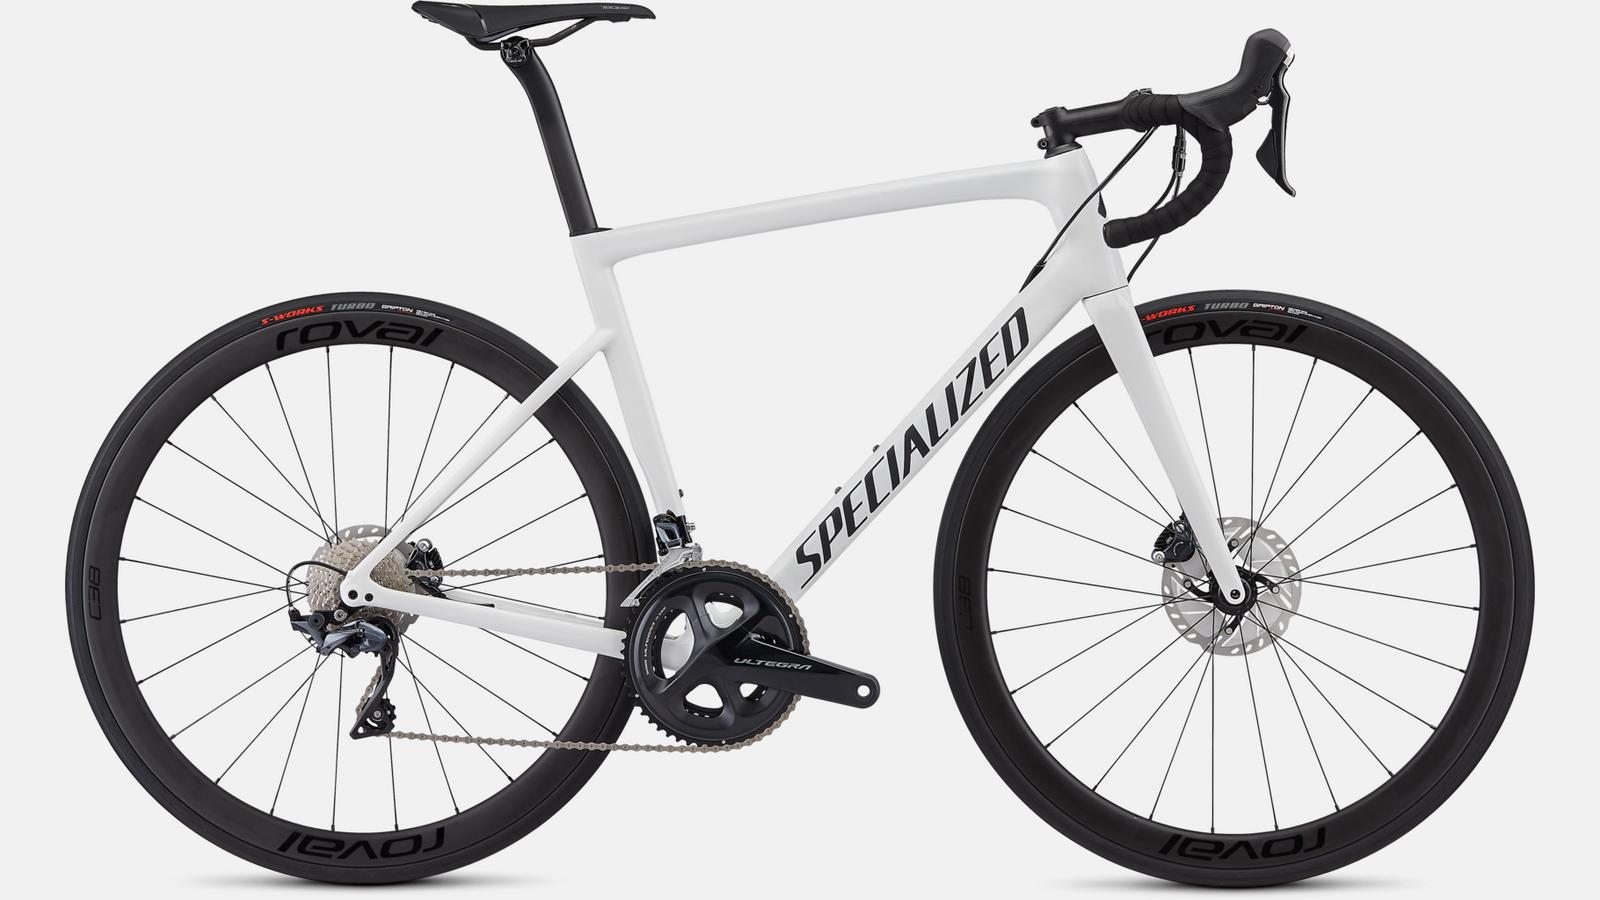 Paint for 2019 Specialized Men's Tarmac Disc Expert - Satin White